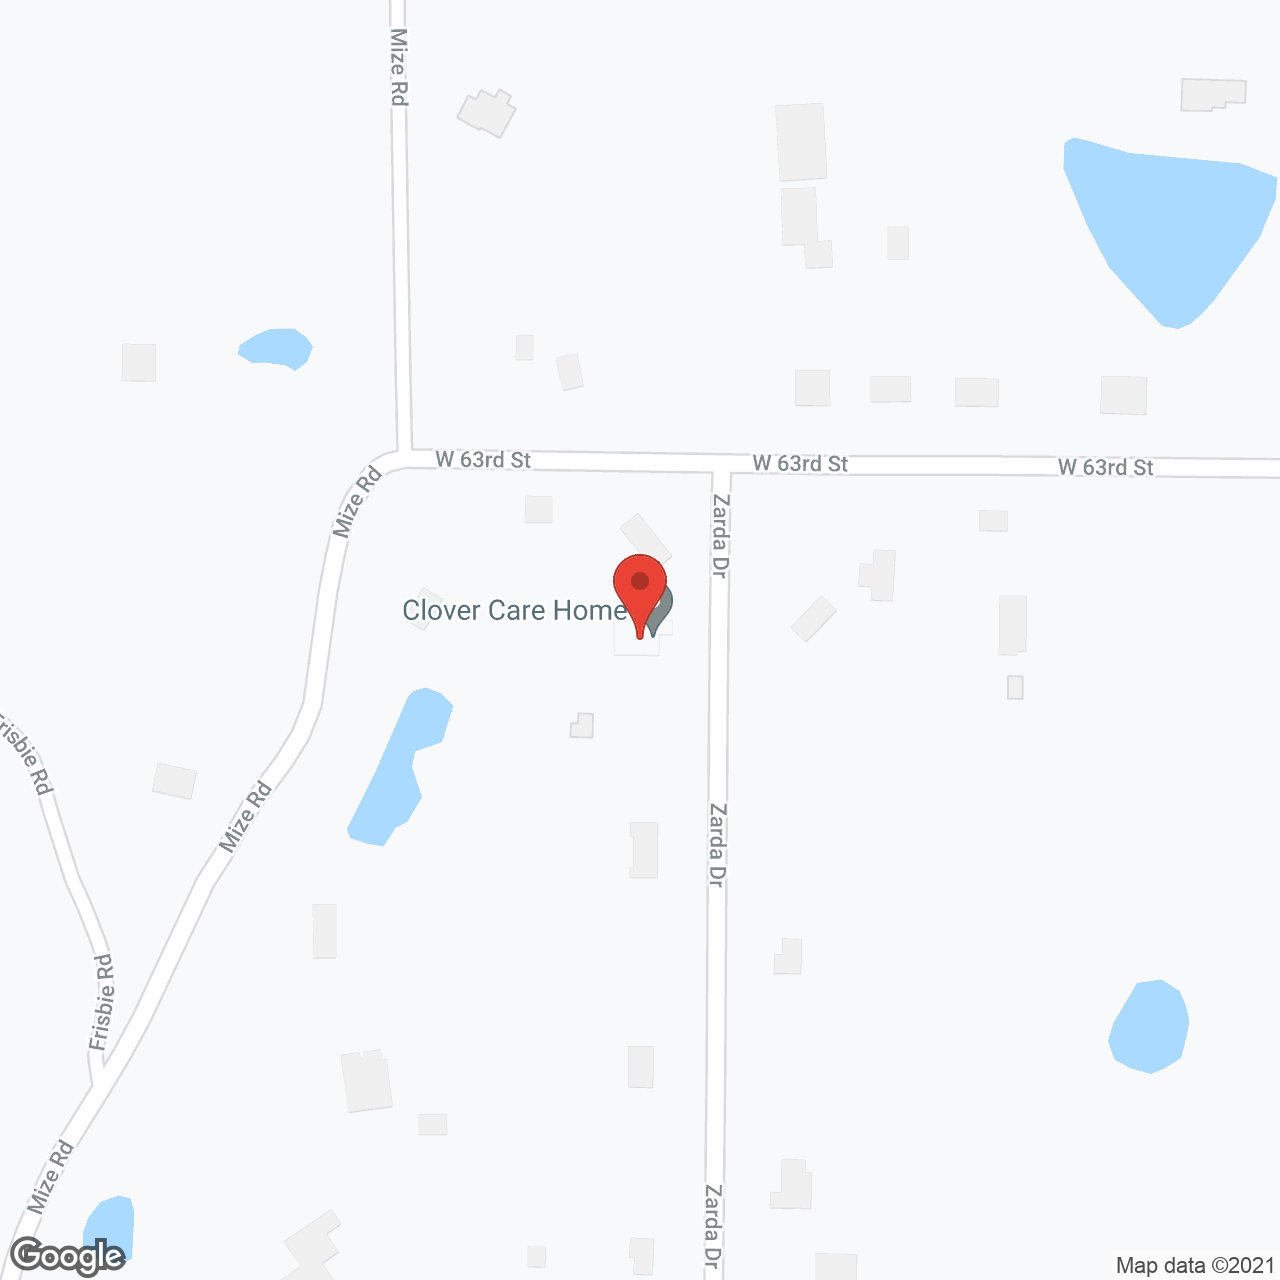 Clover Care Home in google map